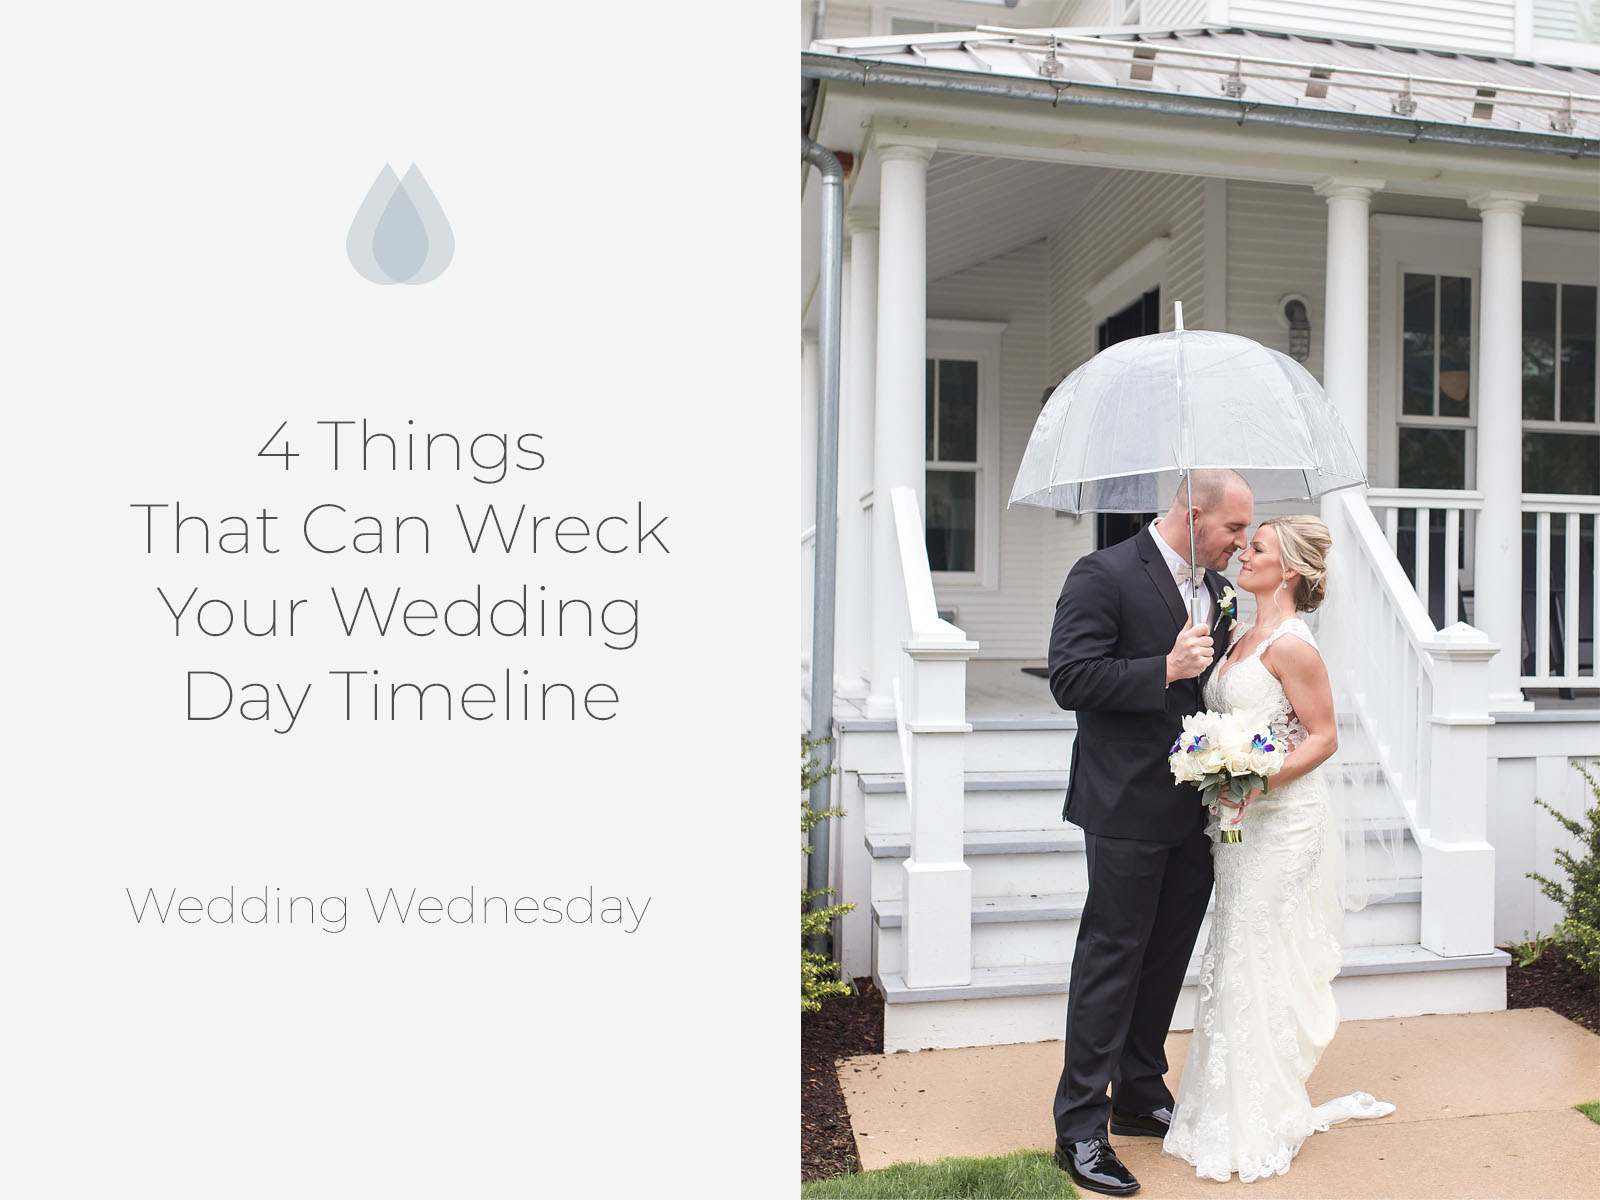 4 Things That Can Wreck Your Wedding Day Timeline